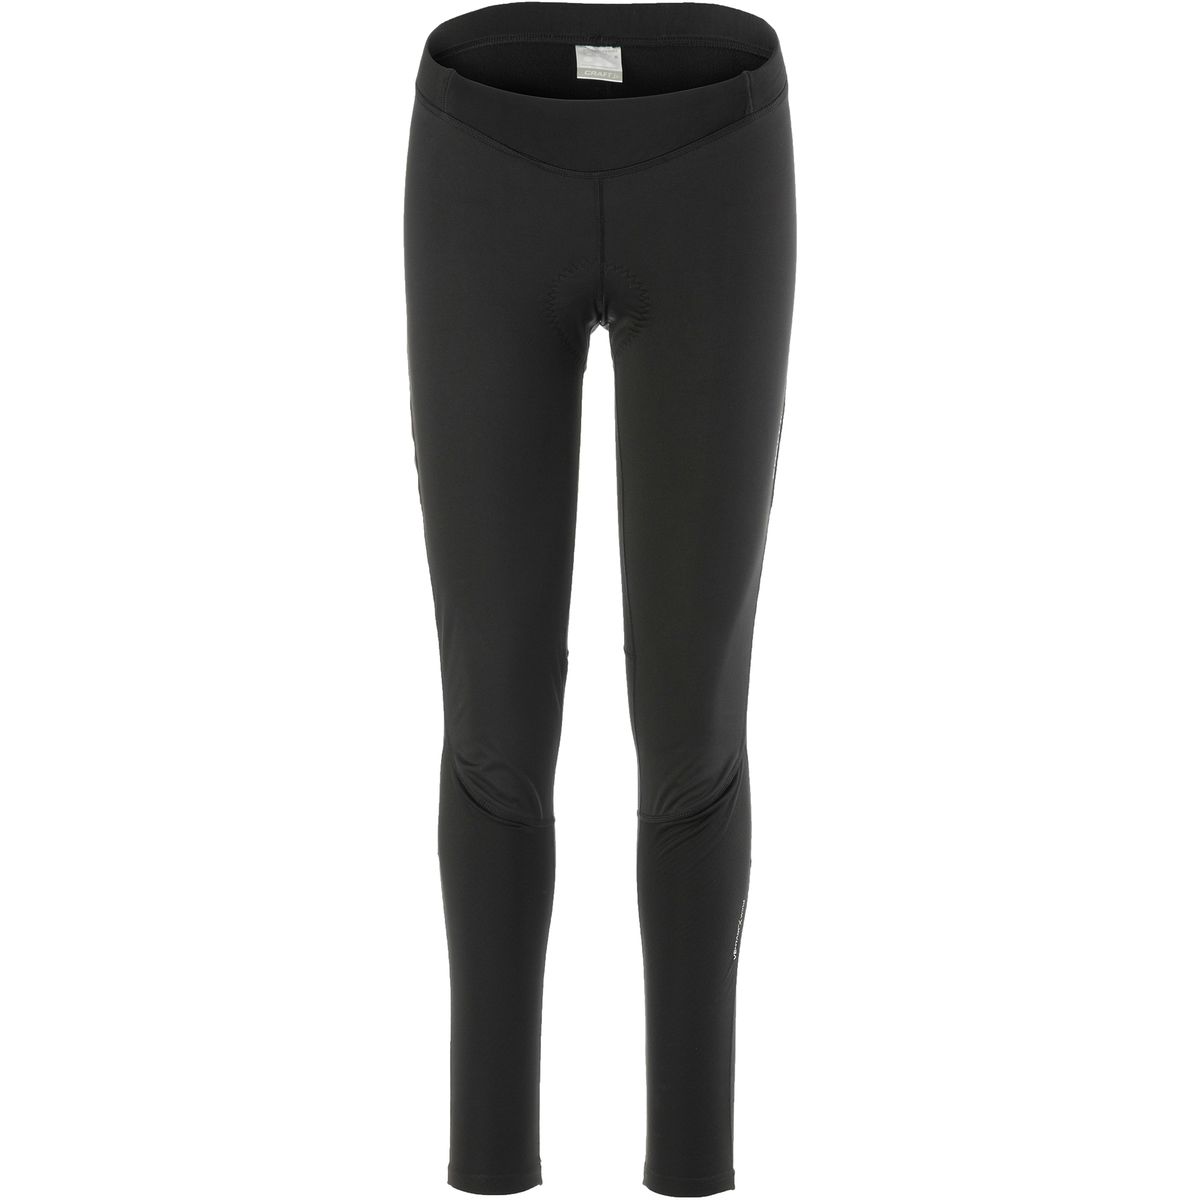 Craft Velo Thermal Wind Tight Womens